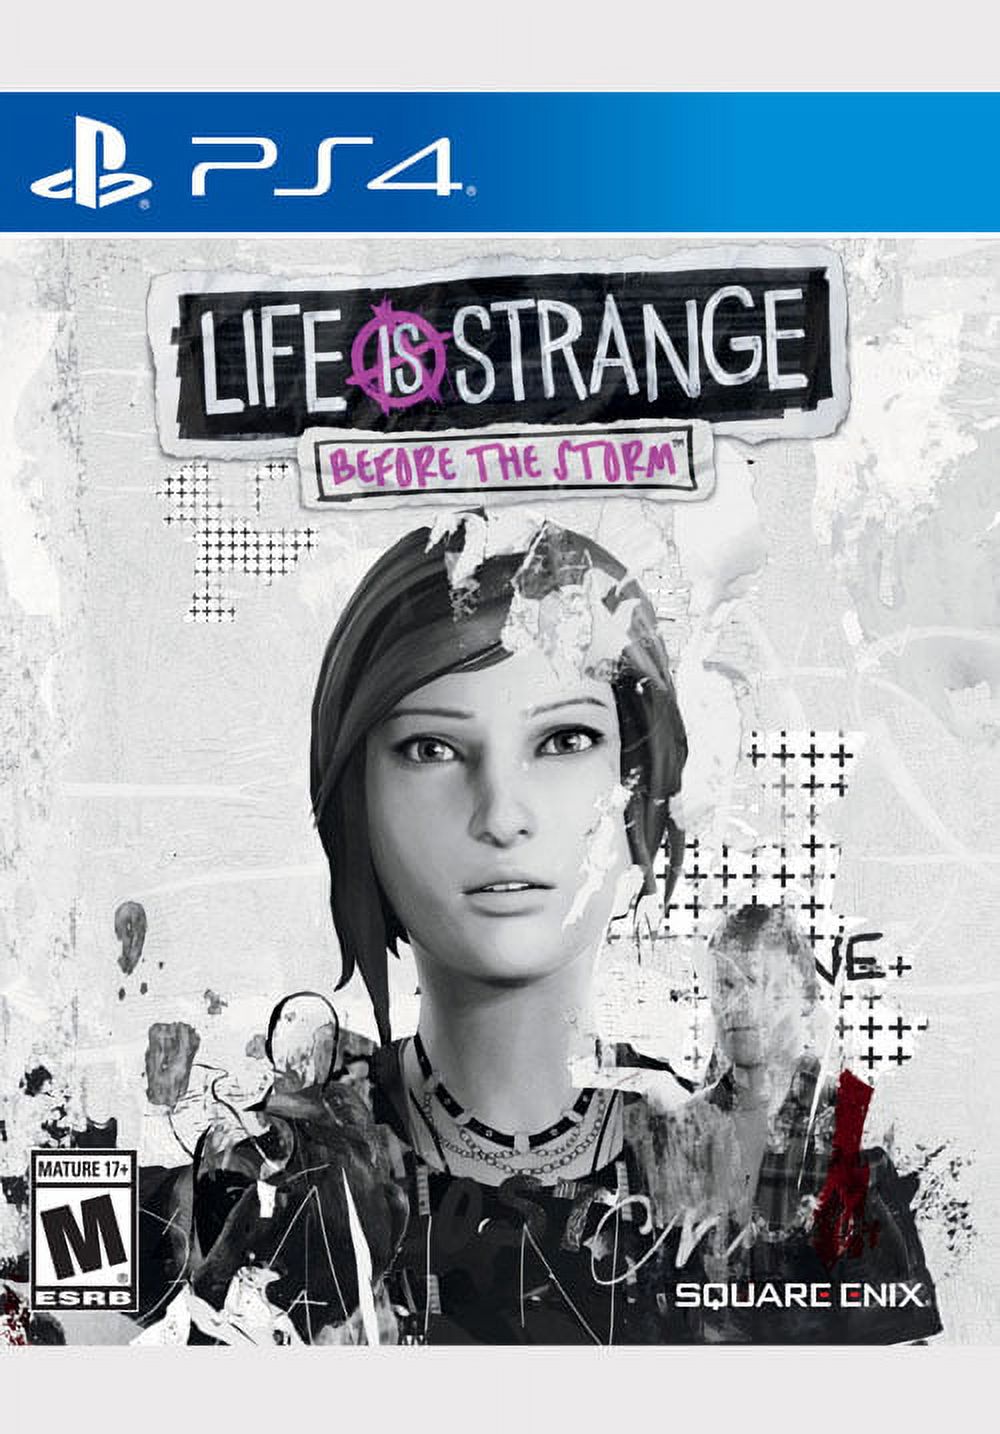 Life Is Strange: Before the Storm - PlayStation 4 - image 2 of 2